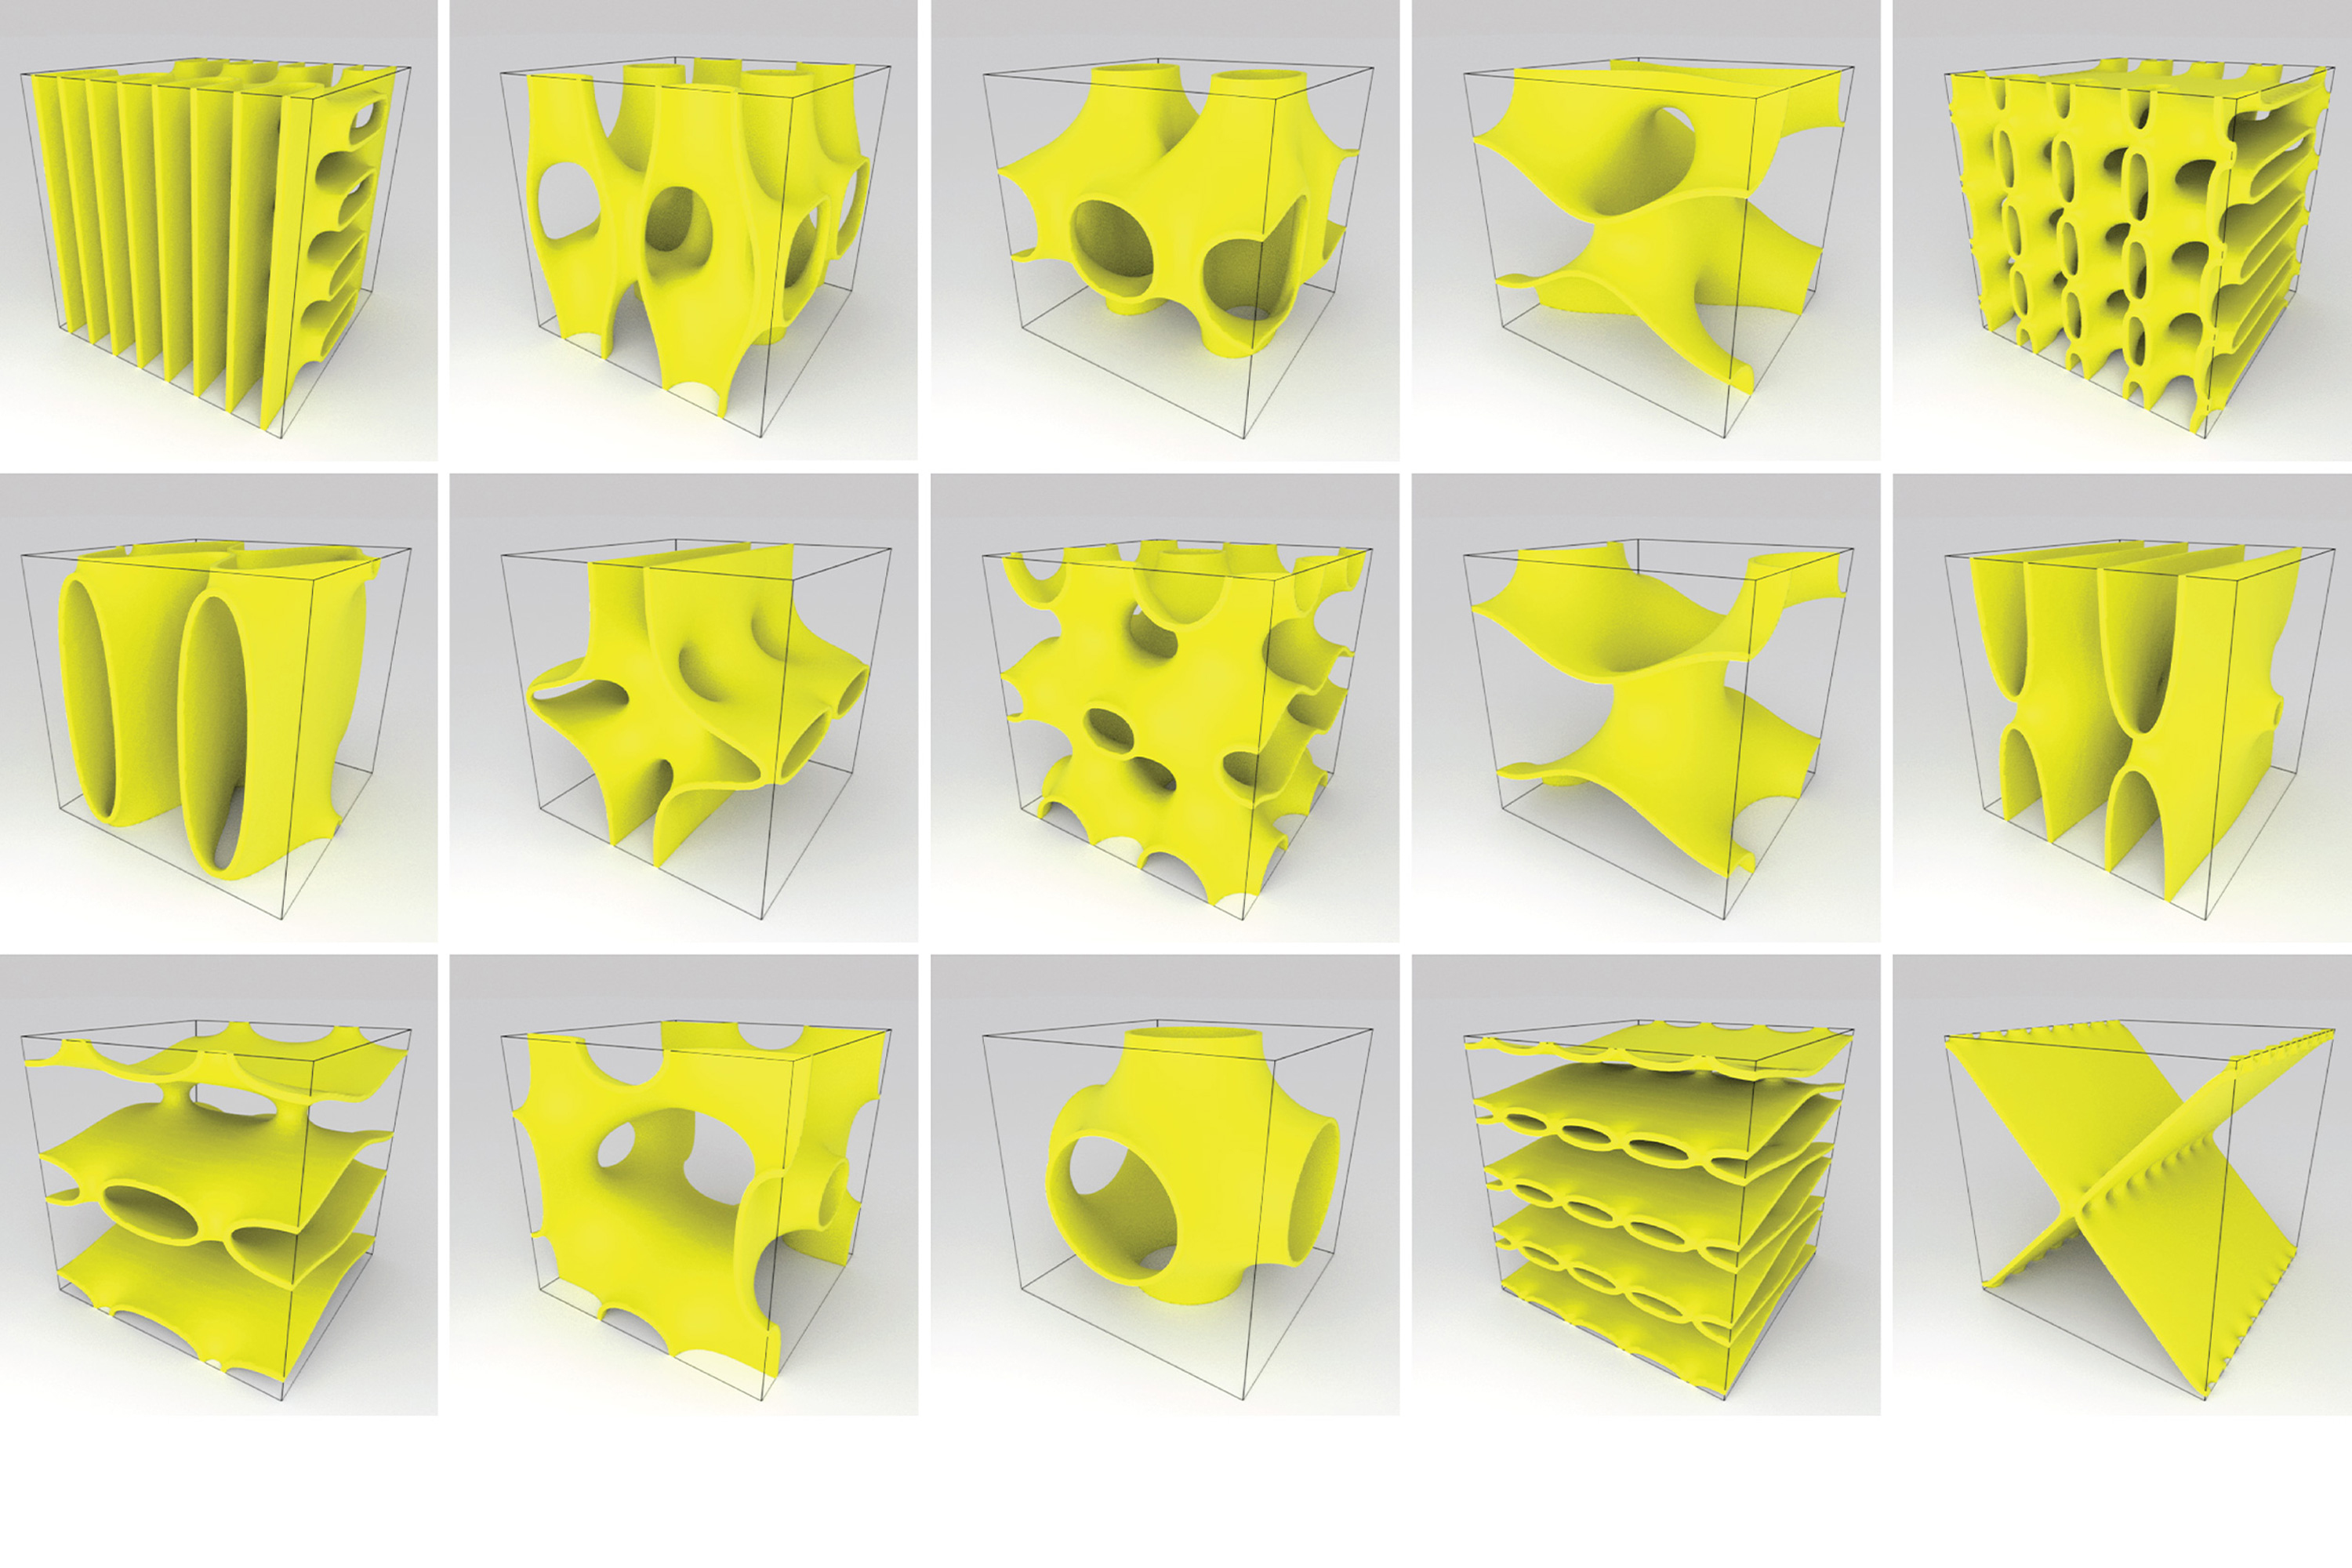 New method simplifies the construction process for complex materials